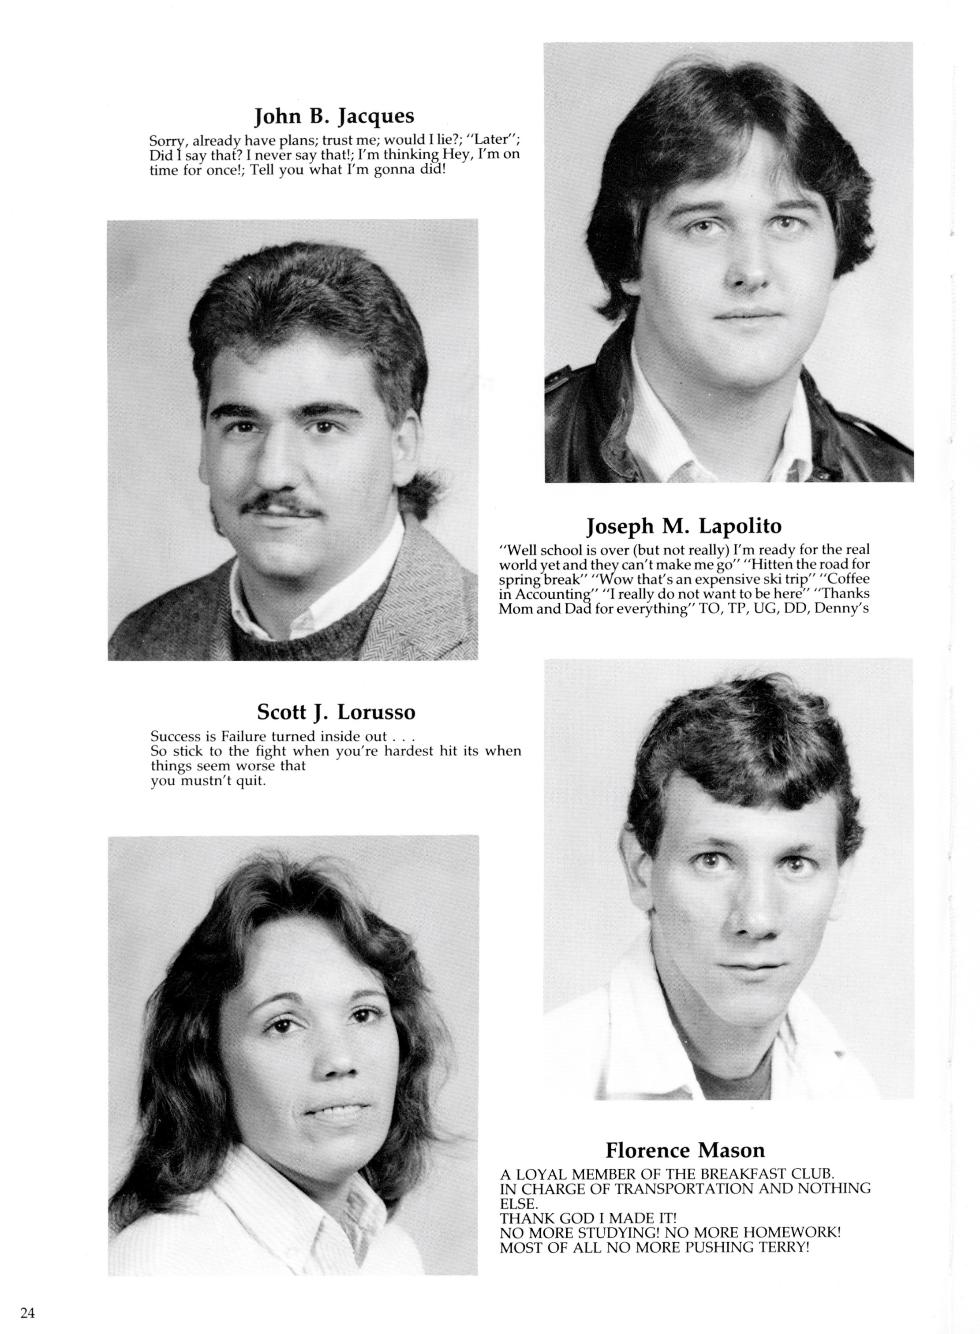 Worcester Industrial Technical Institute Data Processing Class of 1987